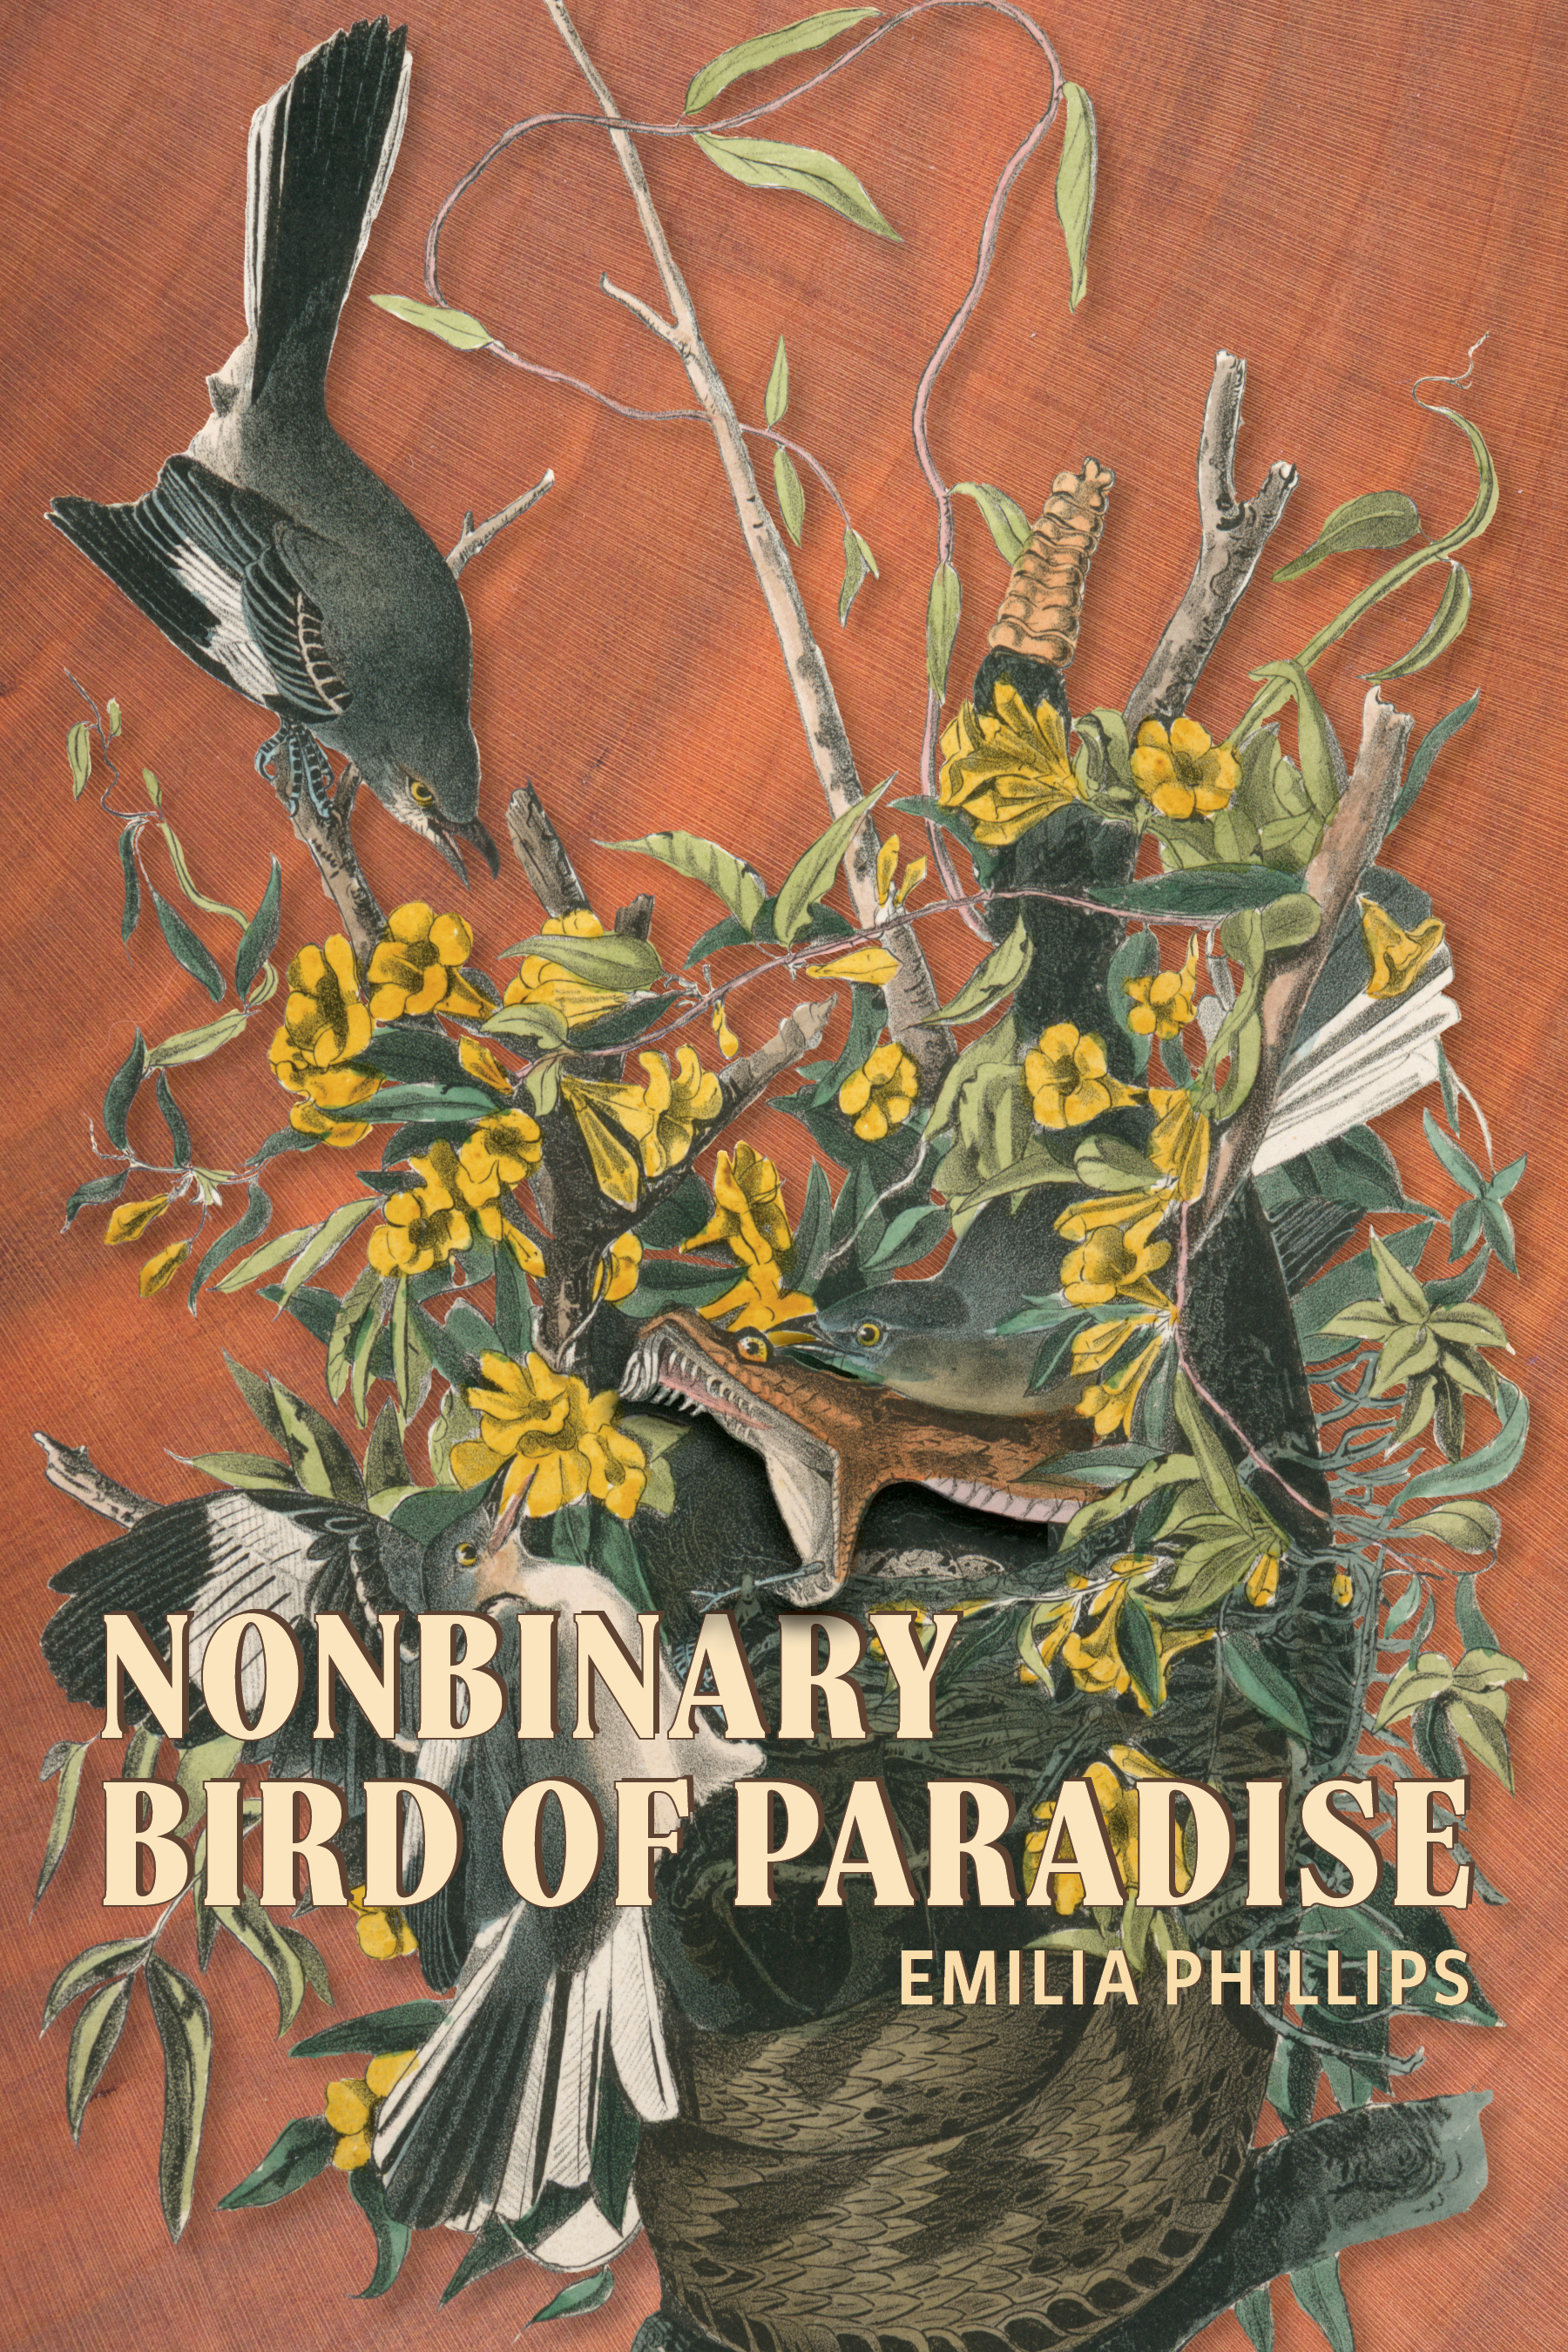 Cover image of Nonbinary Bird of Paradise (University of Akron Press, 2024) by Emilia Phillips. The image is taken from John James Audubon's The Birds of America, and it features a snake fighting two male and two female mockingbirds amidst foliage.